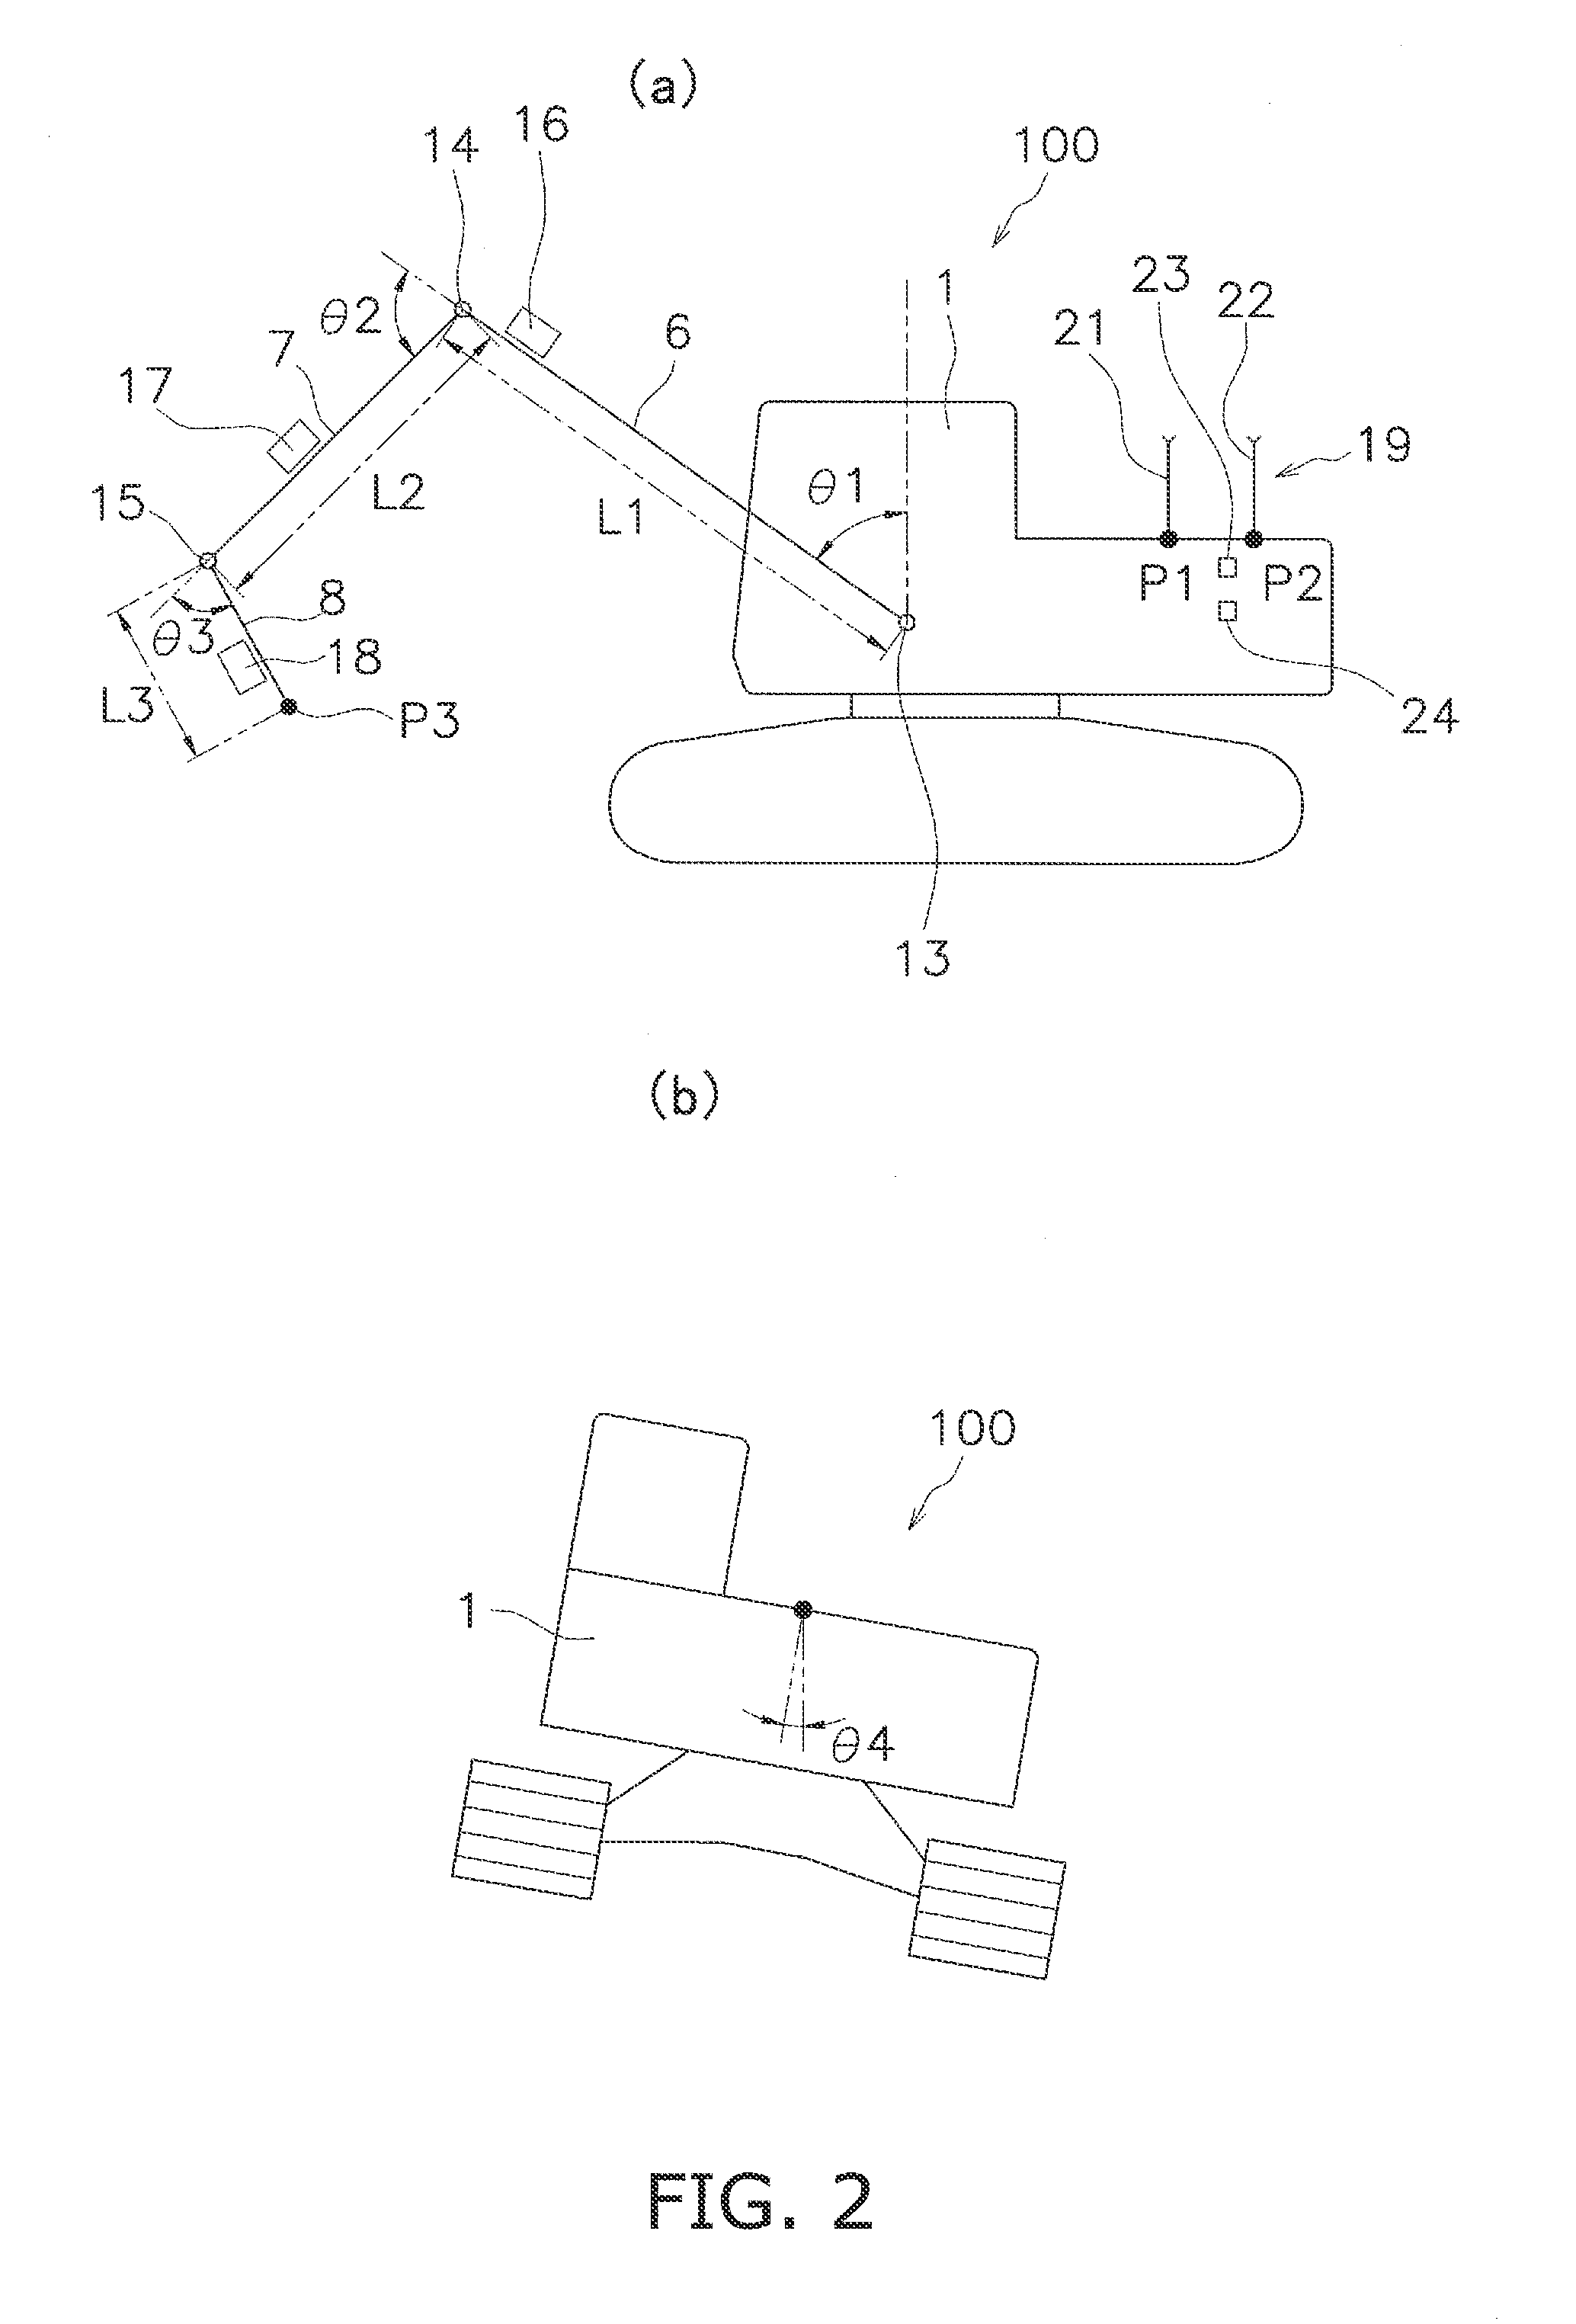 Hydraulic shovel positional guidance system and method of controlling same